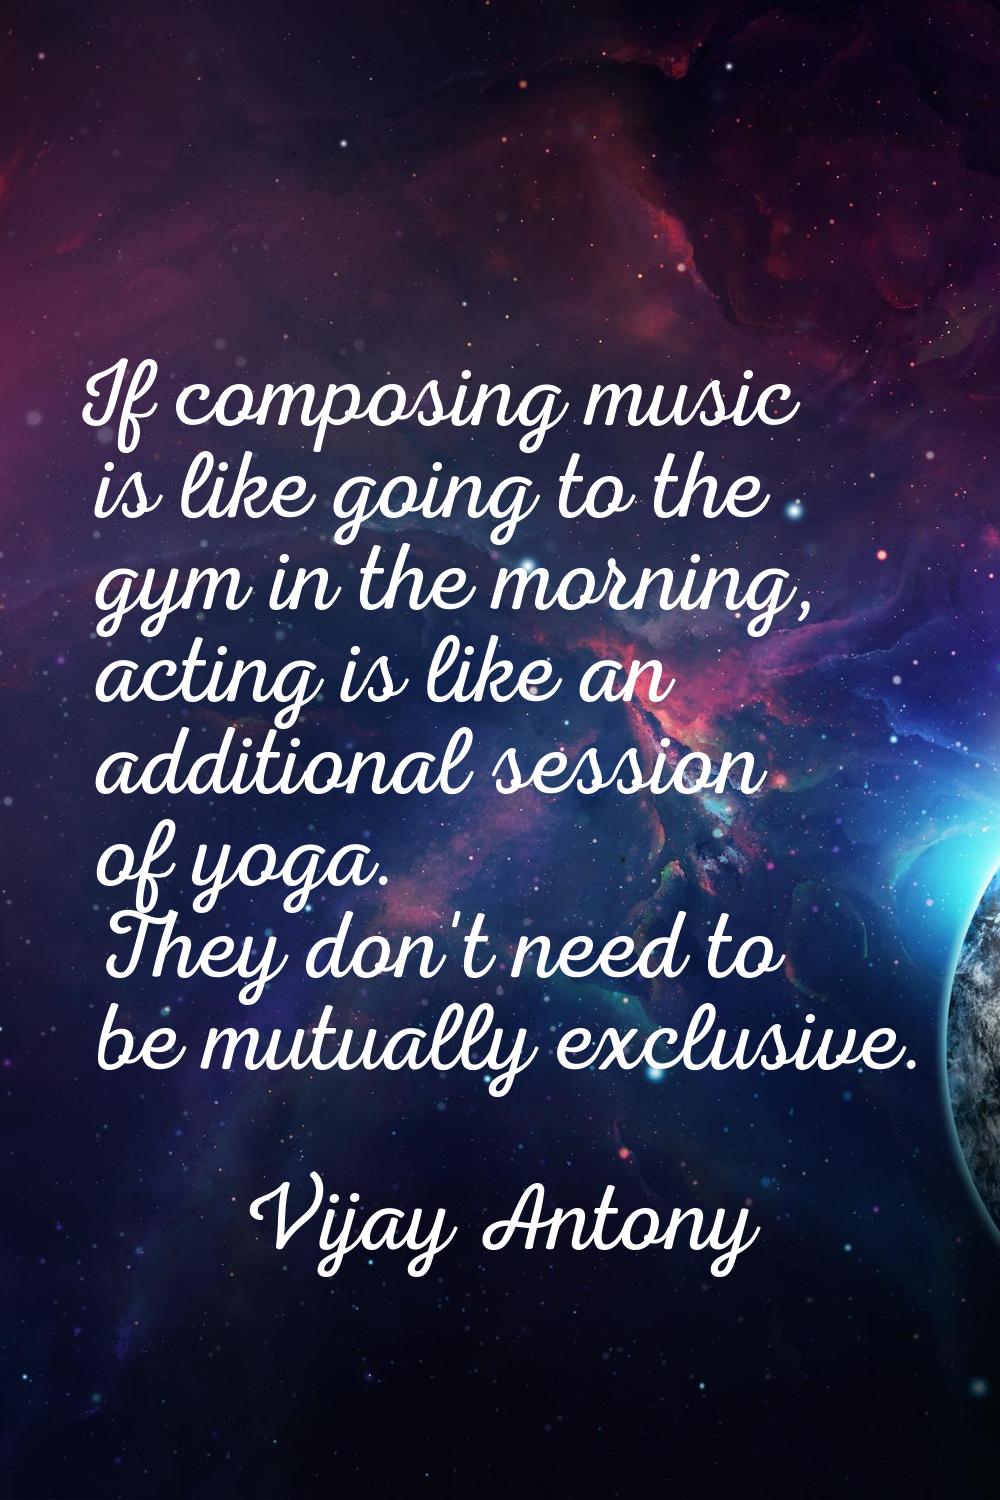 If composing music is like going to the gym in the morning, acting is like an additional session of